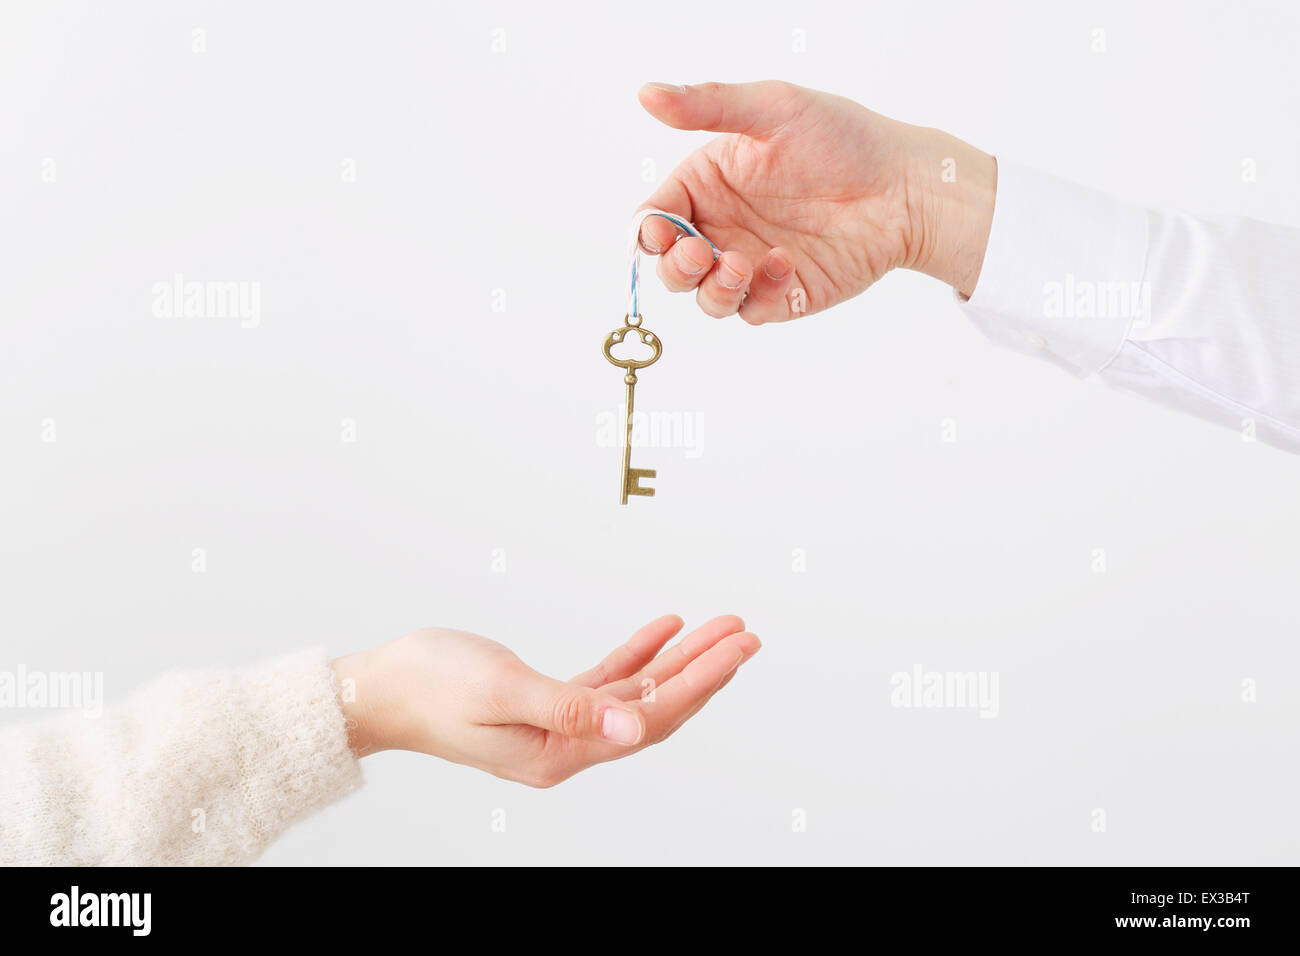 Man and woman hands passing key Stock Photo